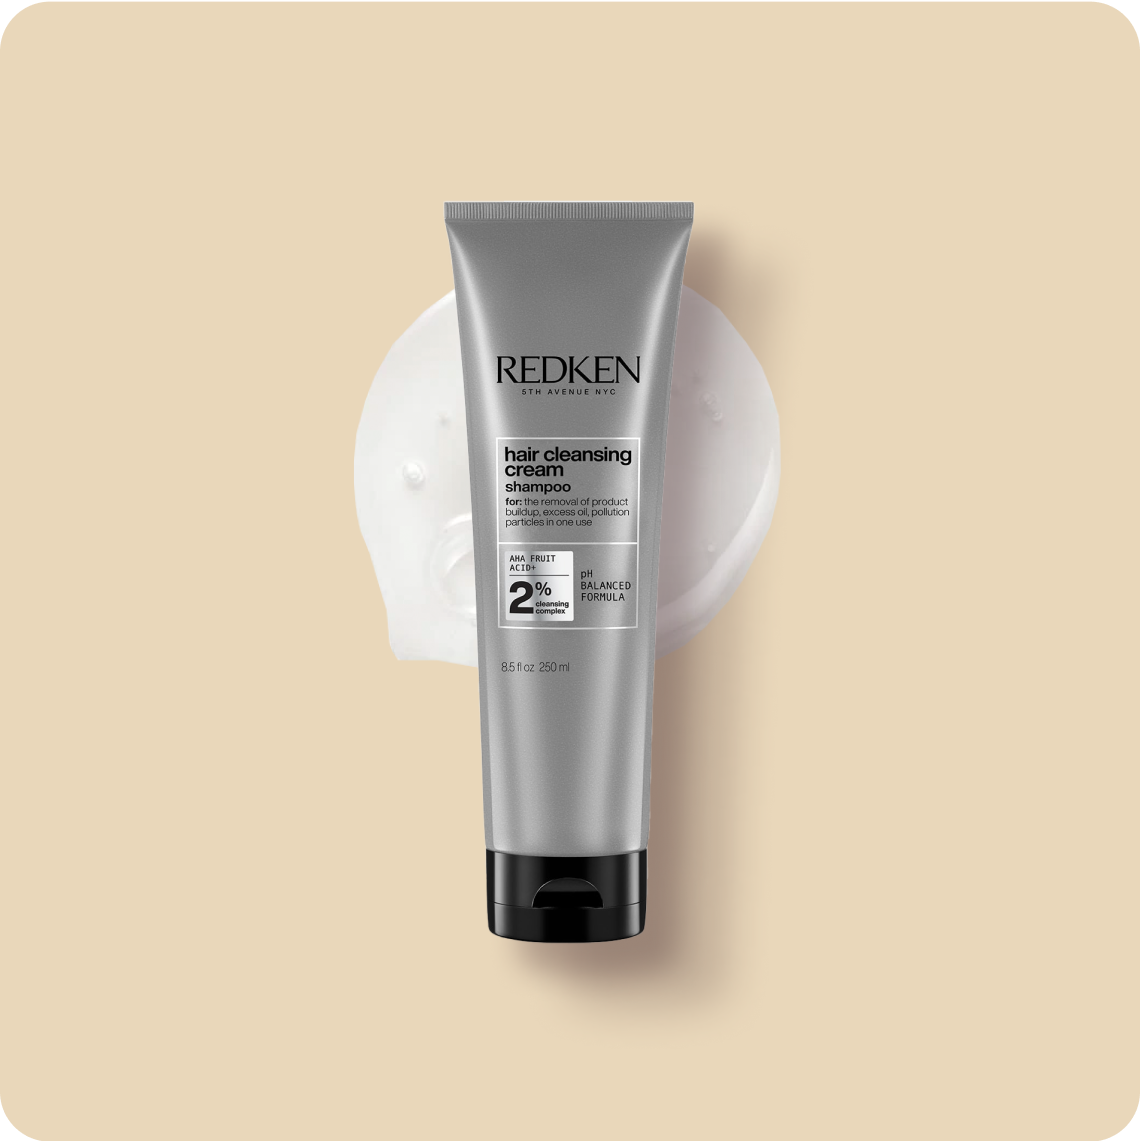 Redken Hair Cleansing and Dandruff